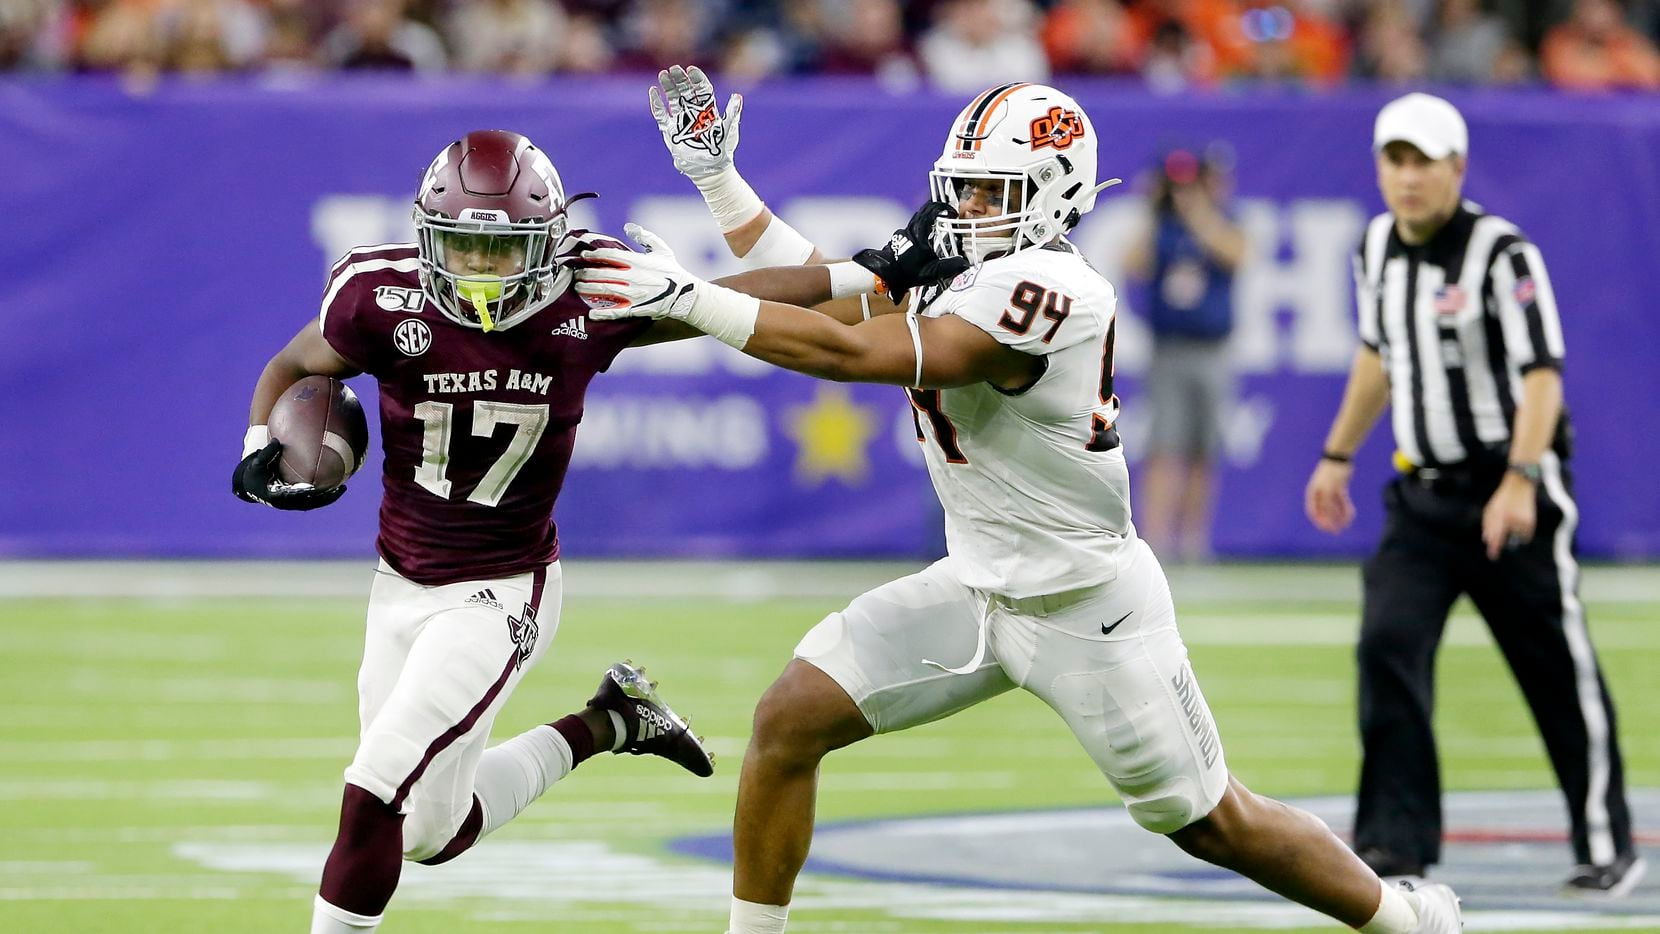 Texas A&M wide receiver Ainias Smith (17) fends off Oklahoma State defensive end Trace Ford (94) during the first half of the Texas Bowl NCAA college football game Friday, Dec. 27, 2019, in Houston.